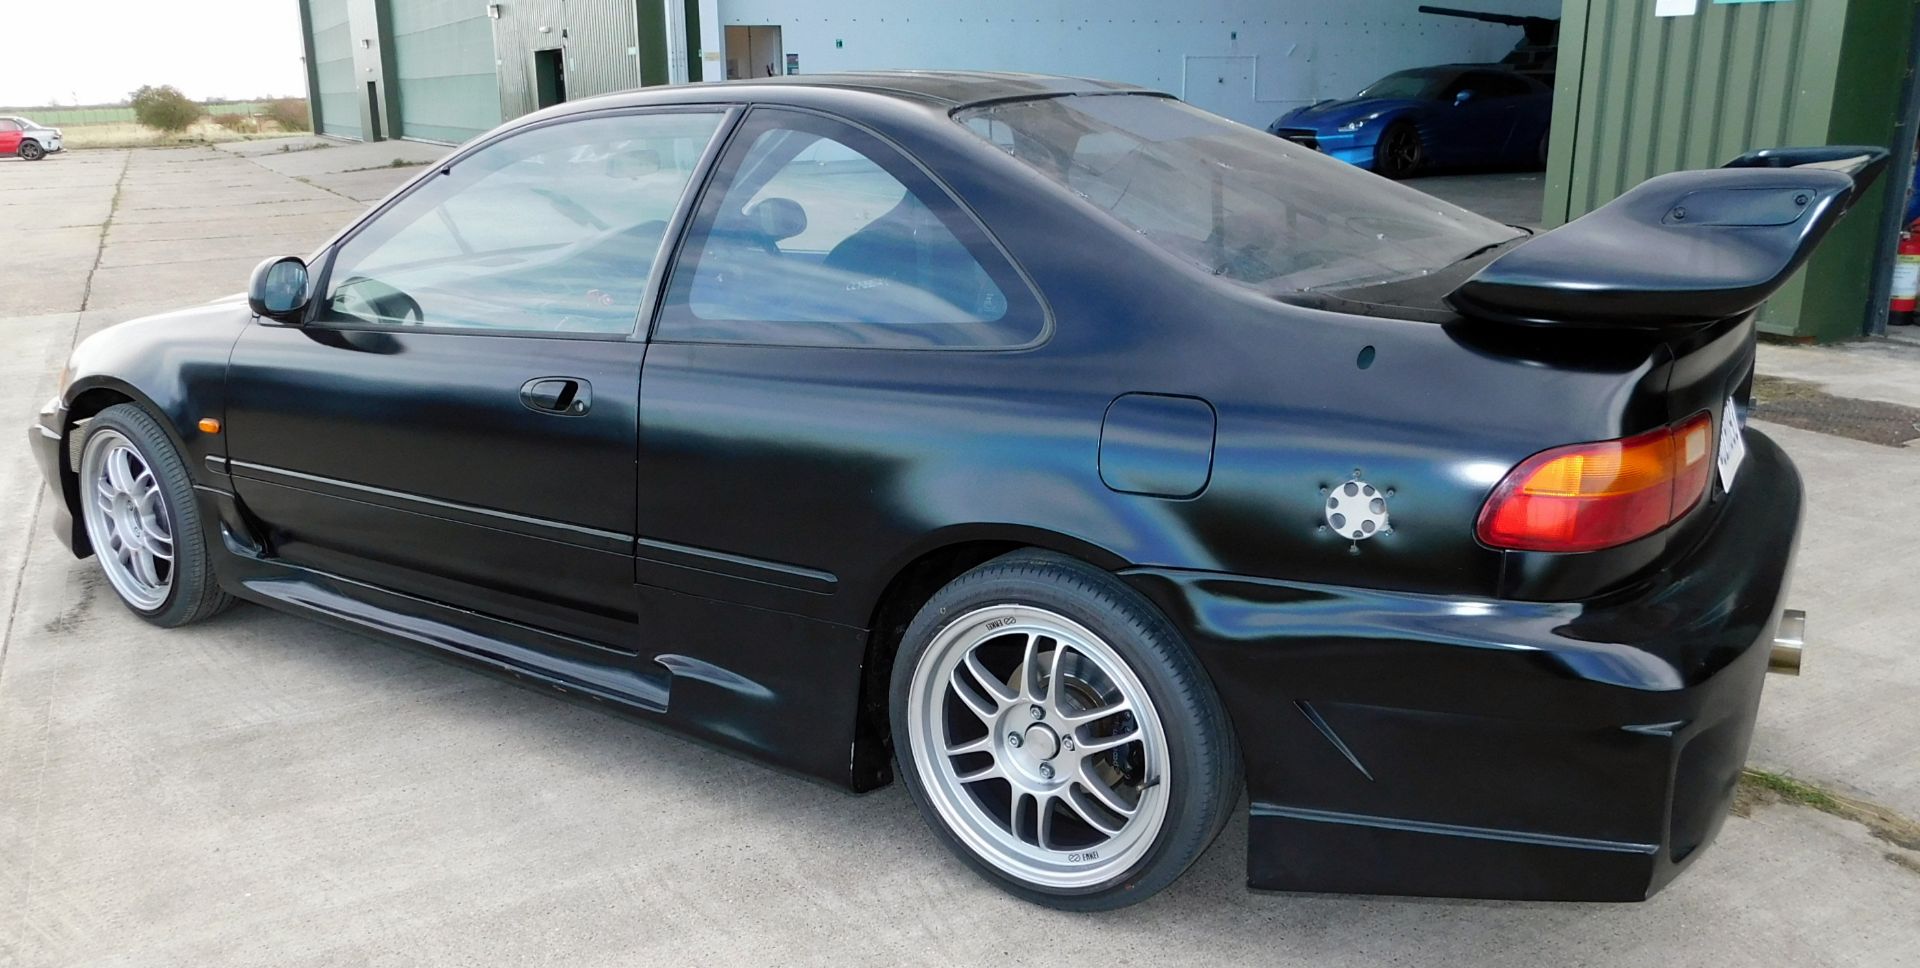 Honda Civic RHD Saloon, One to One Replica, Ford Duratec 2.0 Petrol Engine, H Pattern Manual - Image 3 of 11